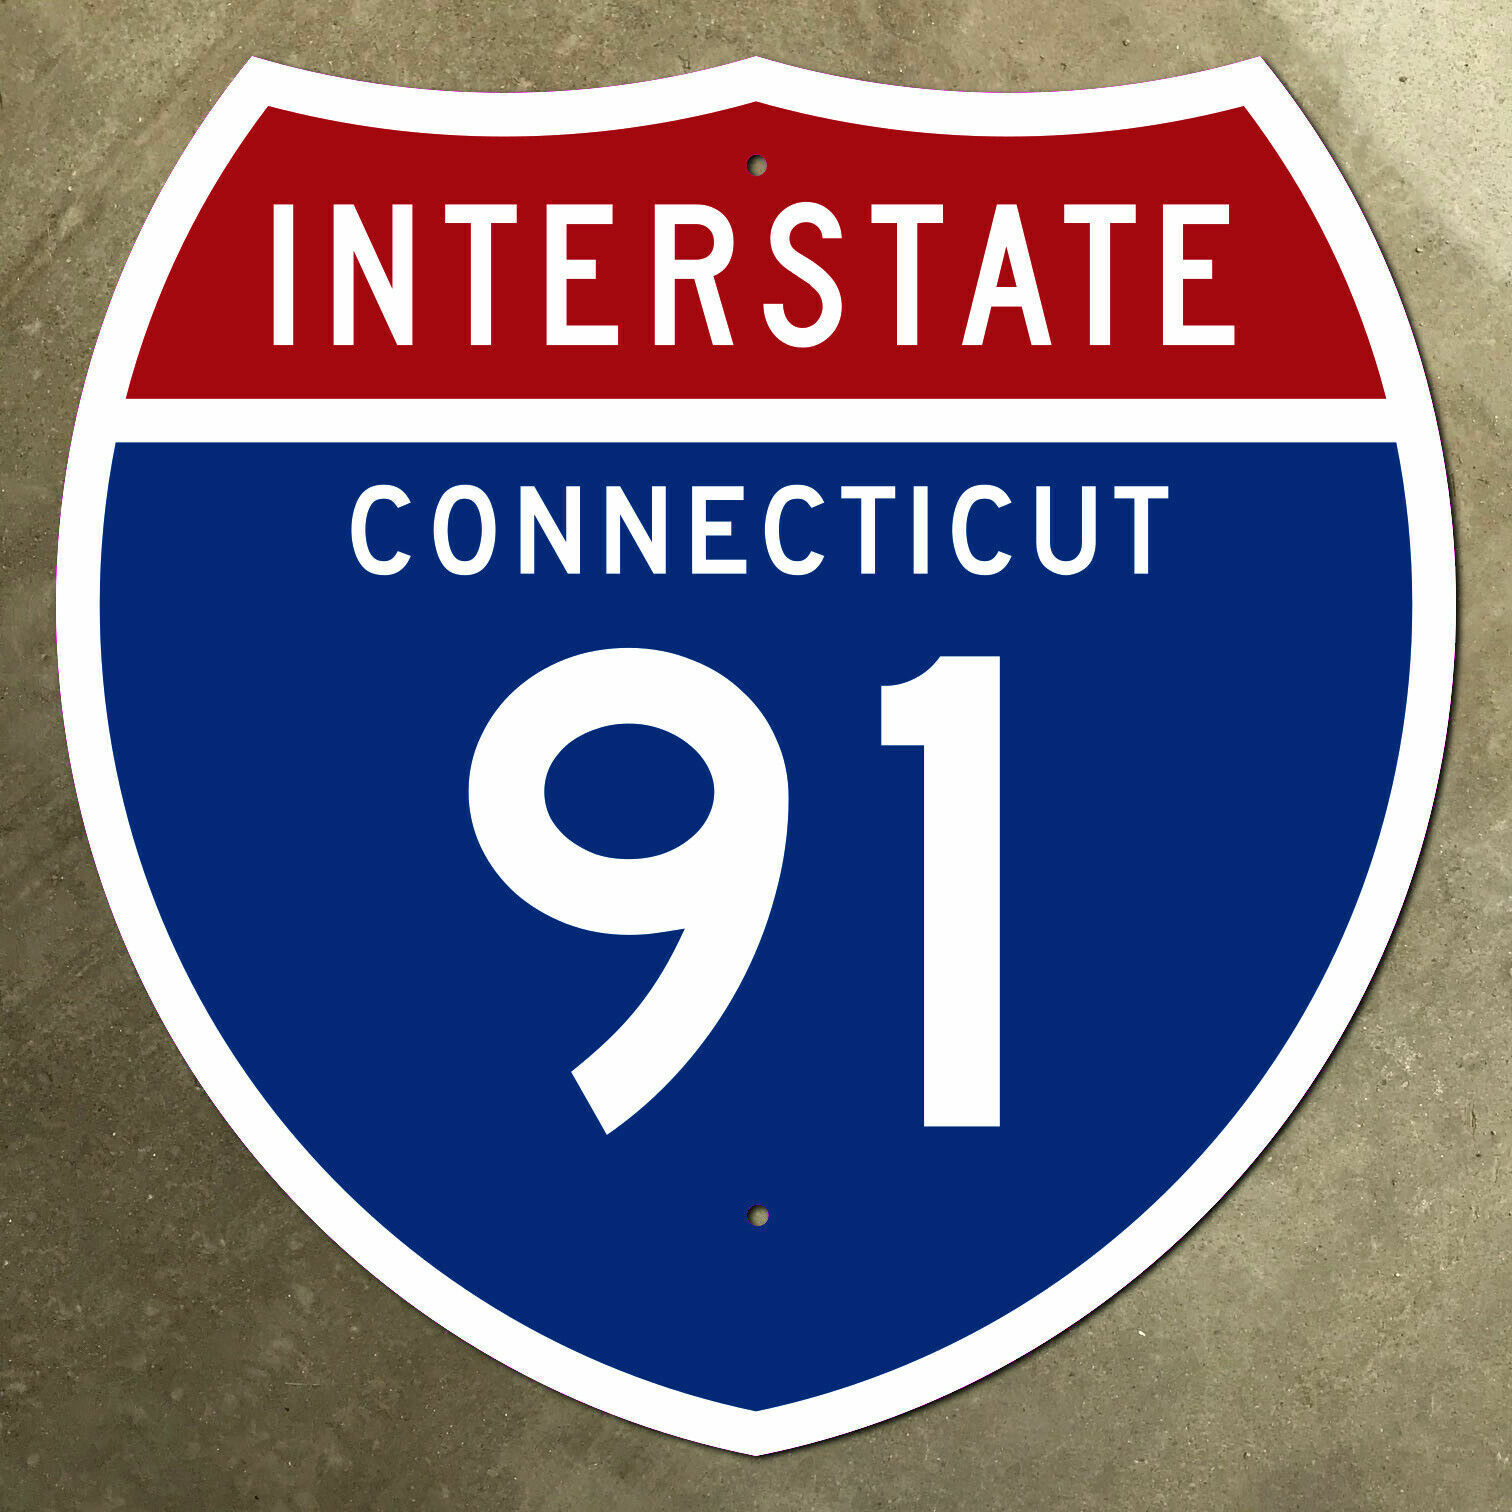 Connecticut interstate route 91 highway marker road sign 18x18